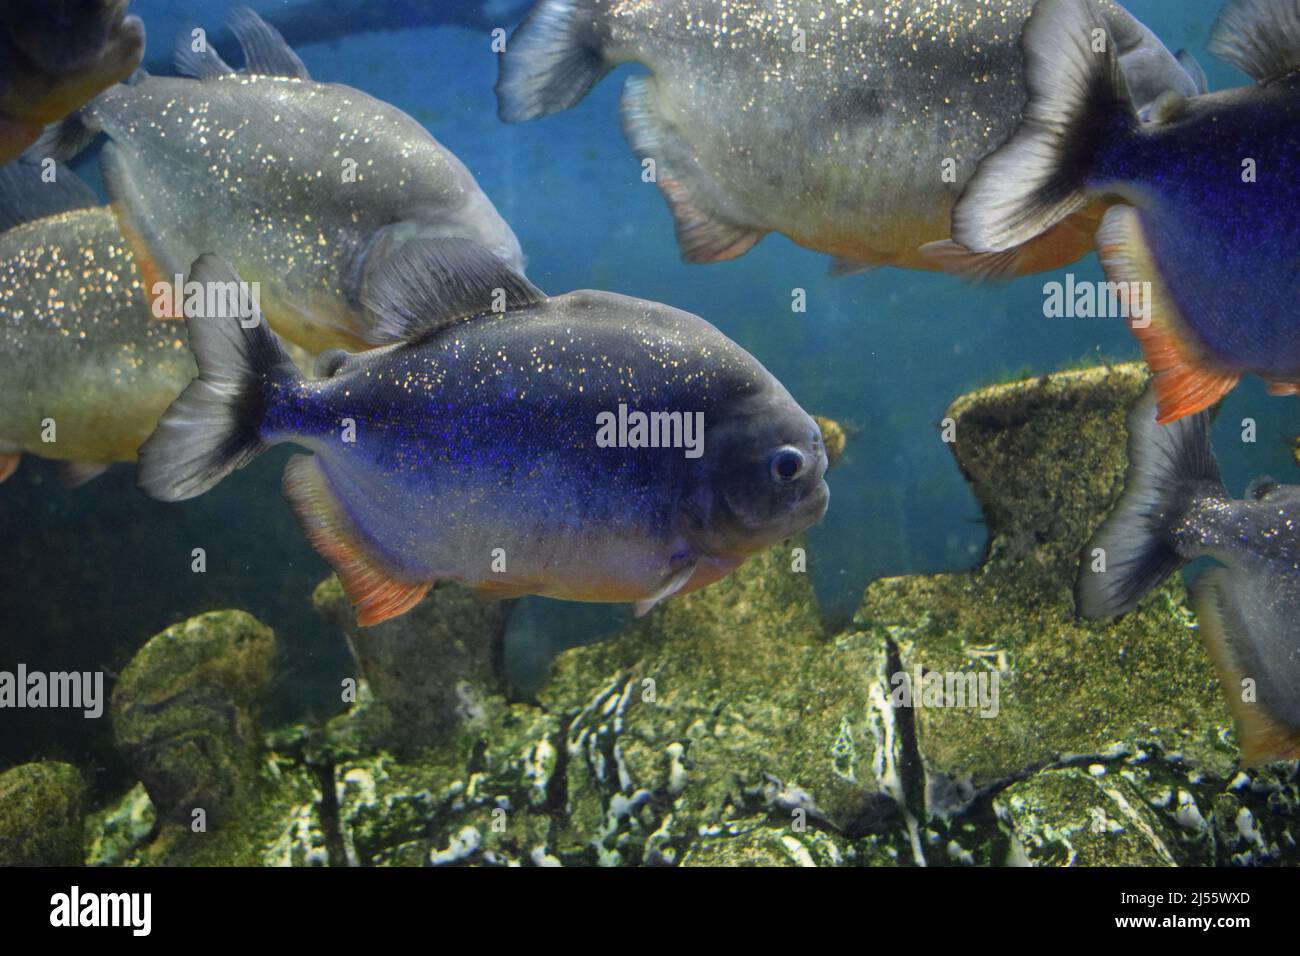 Group of red-bellied piranhas are swimming in fish tank. Red piranha (Pygocentrus nattereri), selective focus. Stock Photo